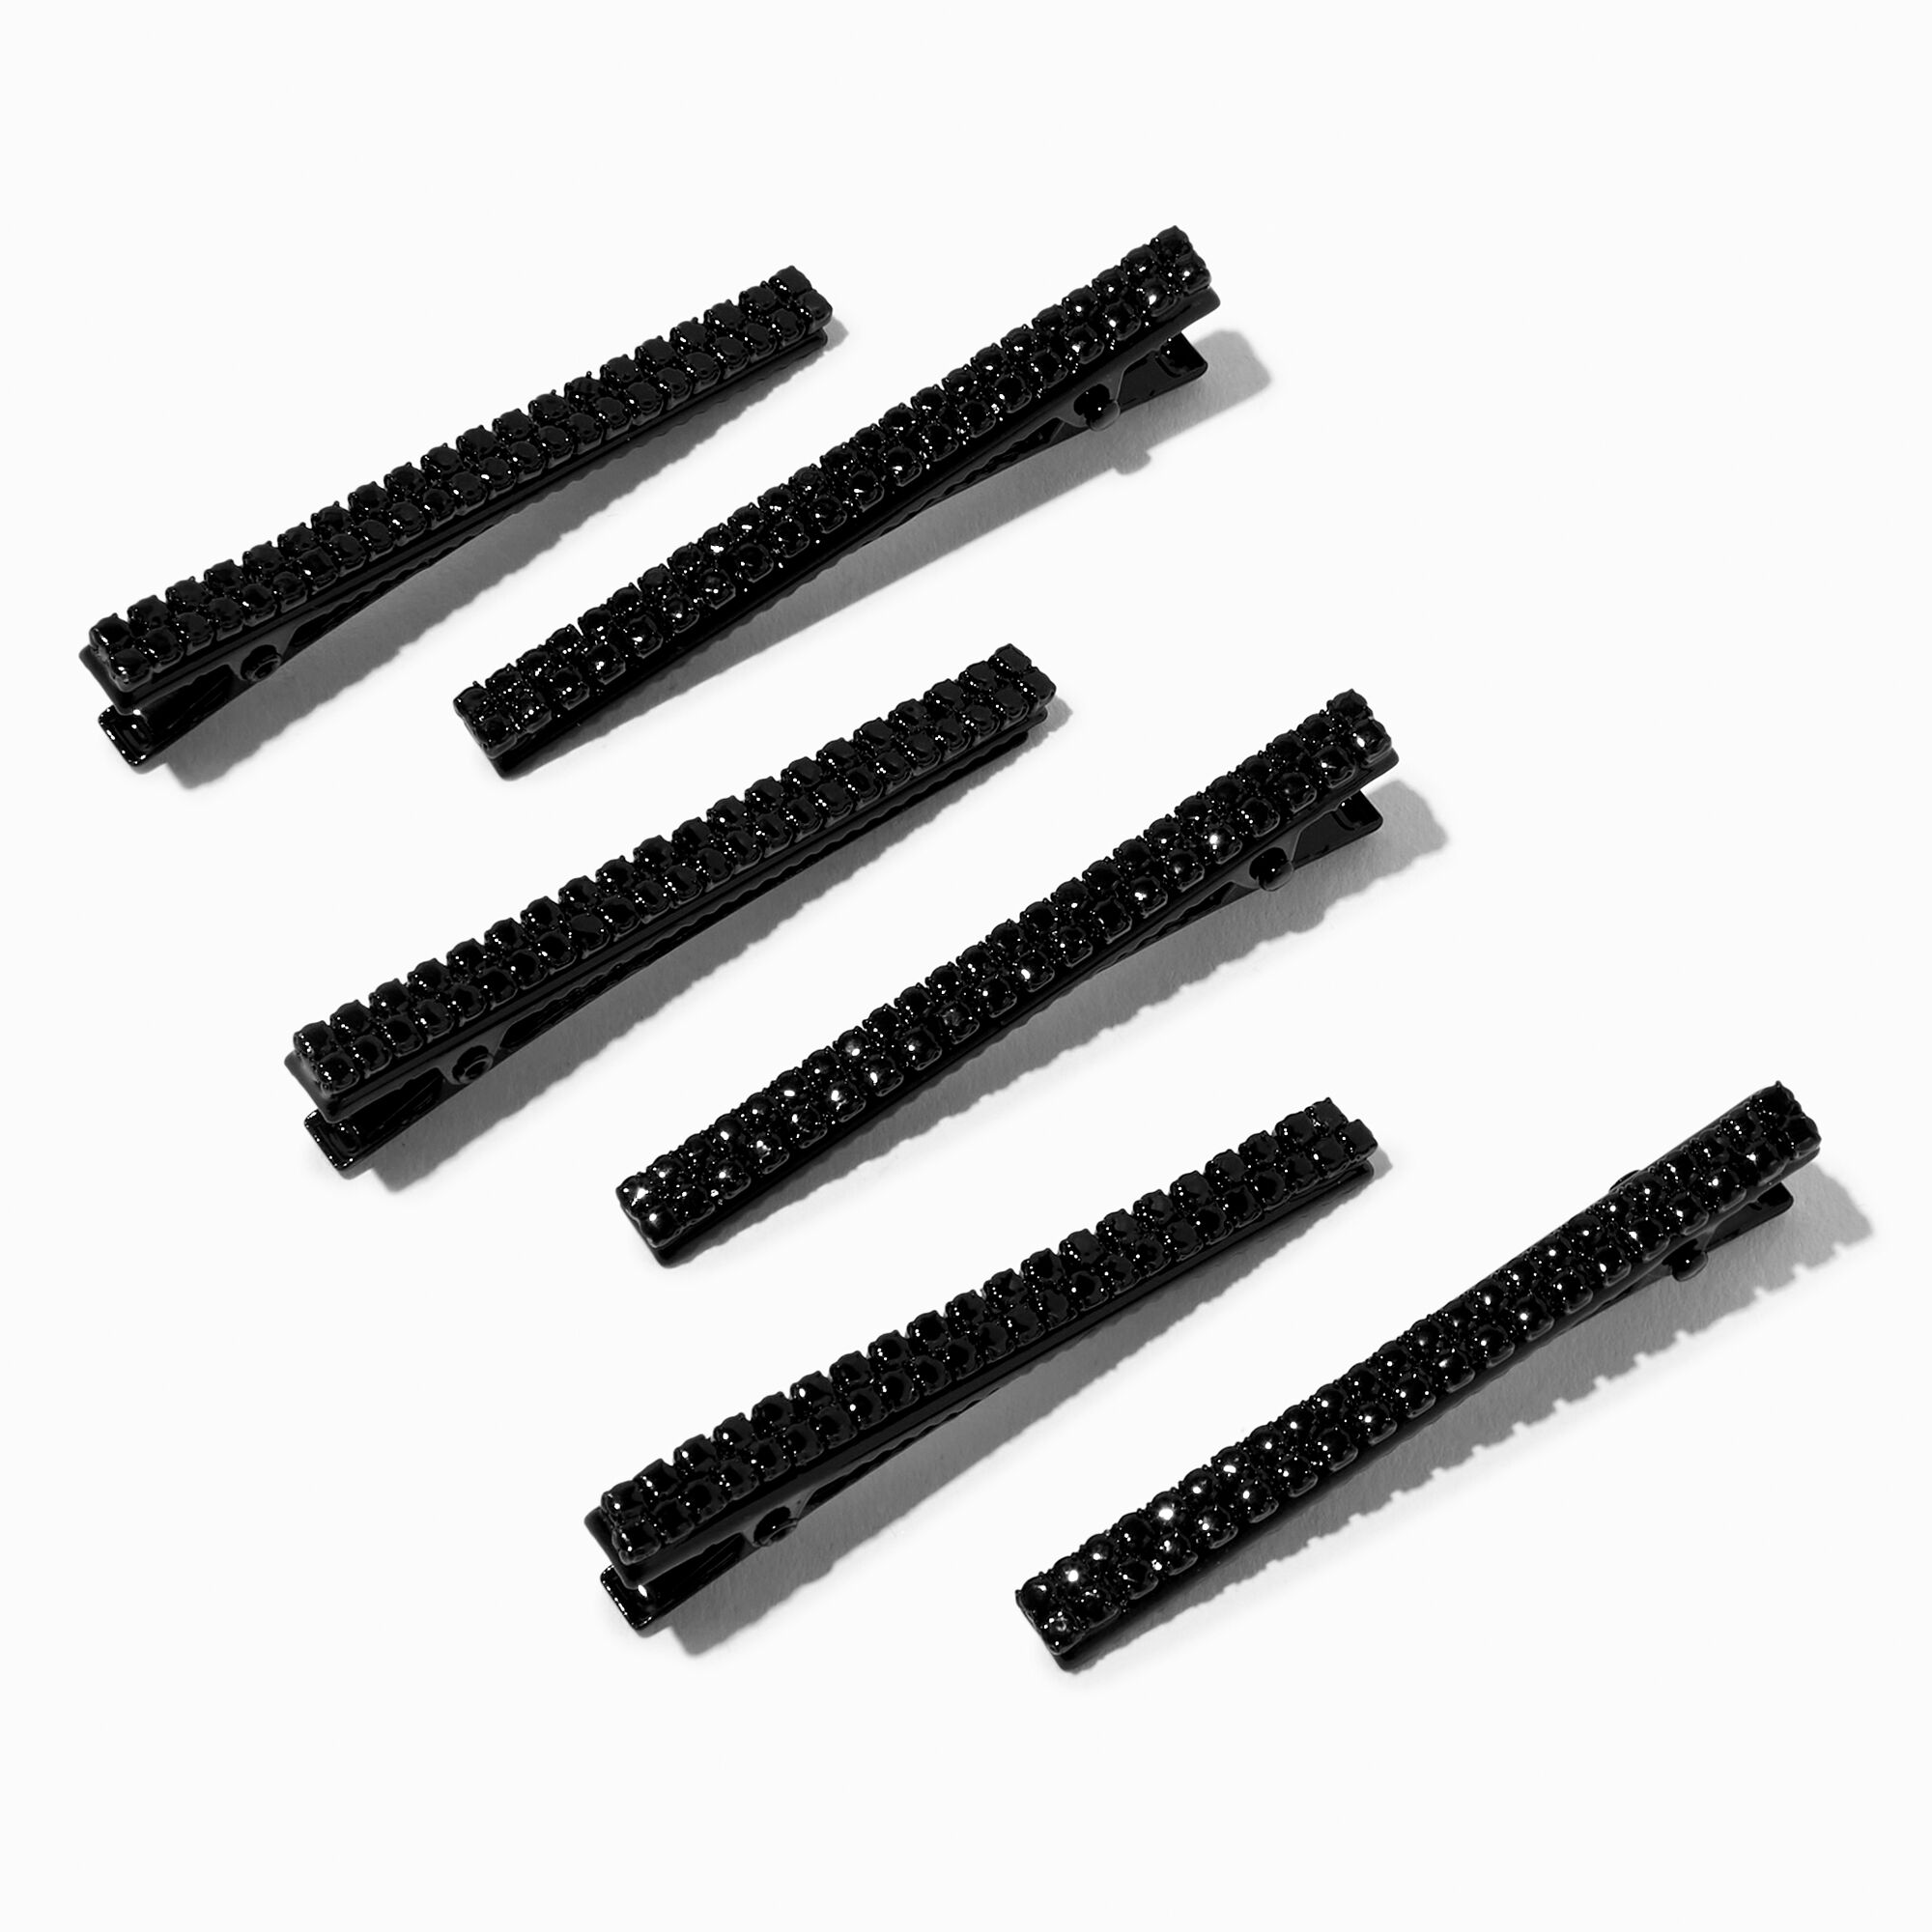 View Claires Jet Alligator Hair Clips 6 Pack Black information